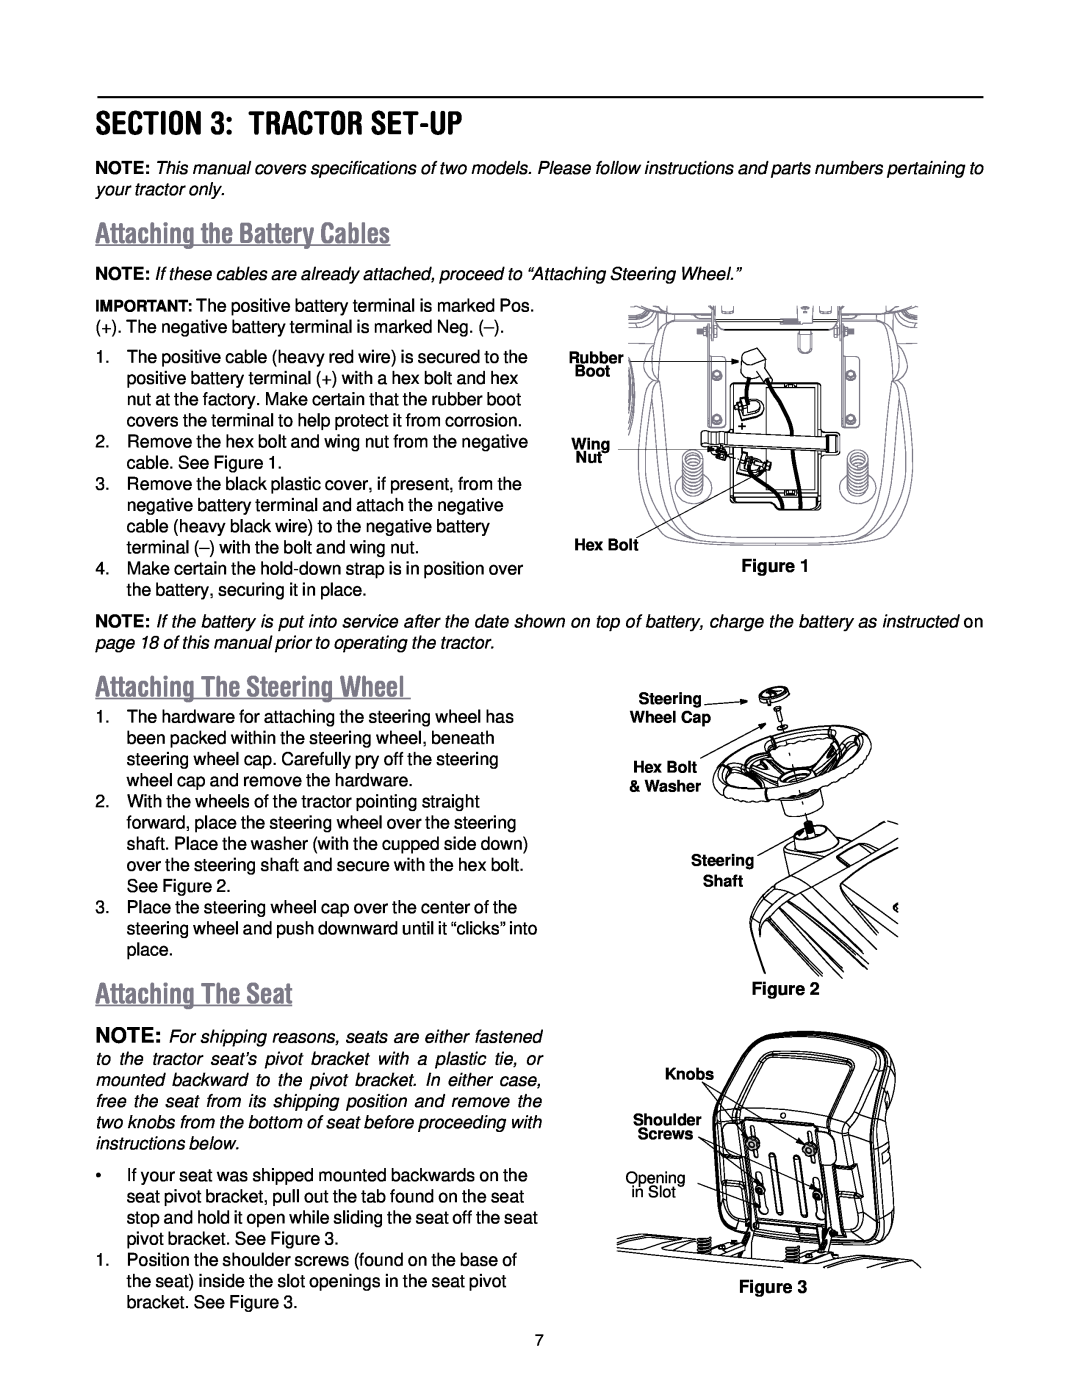 MTD 604H manual Tractor Set-Up, Attaching the Battery Cables, Attaching The Steering Wheel, Attaching The Seat 